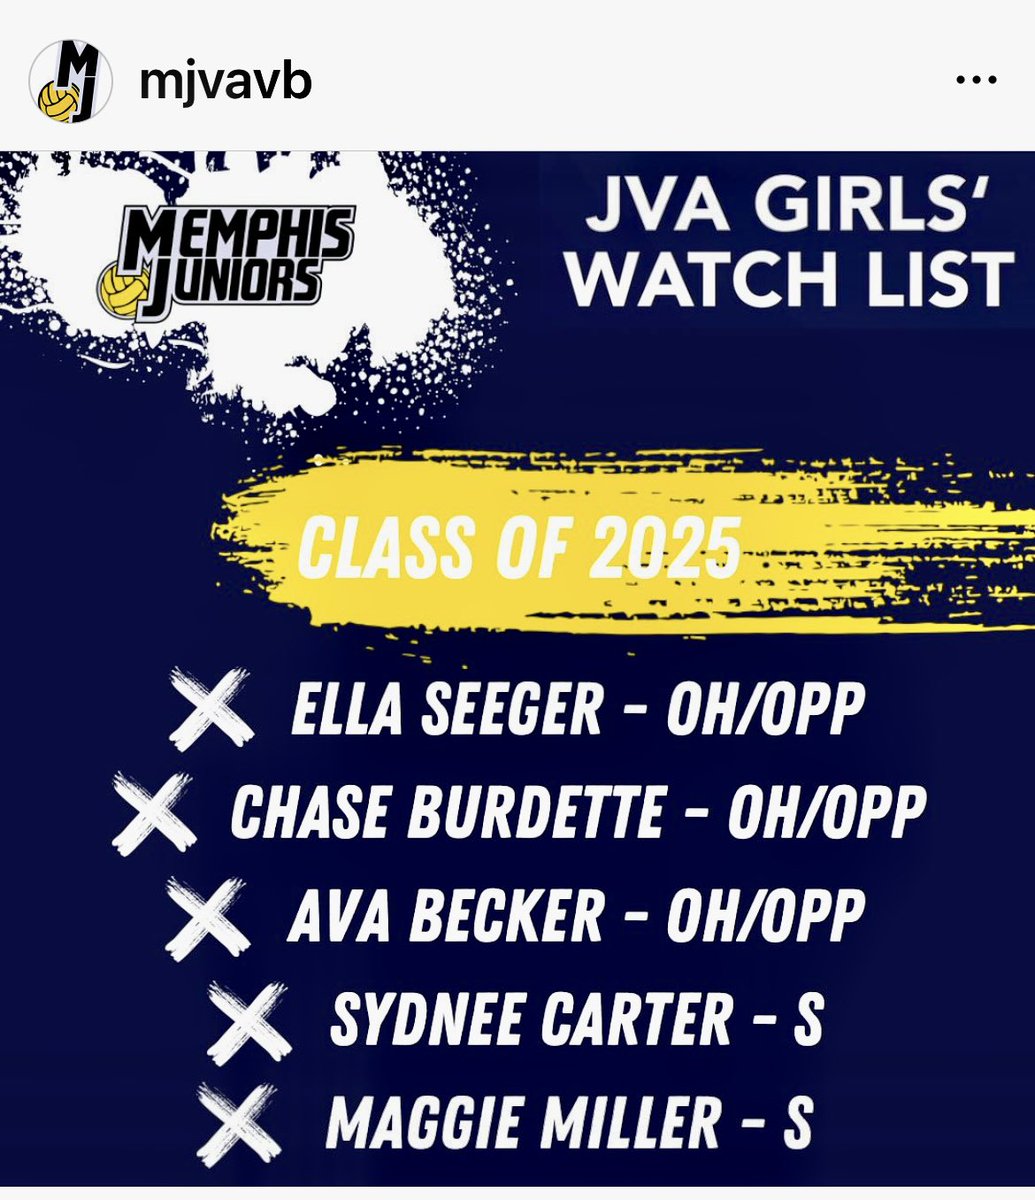 Excited to be named to the Junior Volleyball Assoc Watch List! ❤️ #2025setter #memphisjuniors